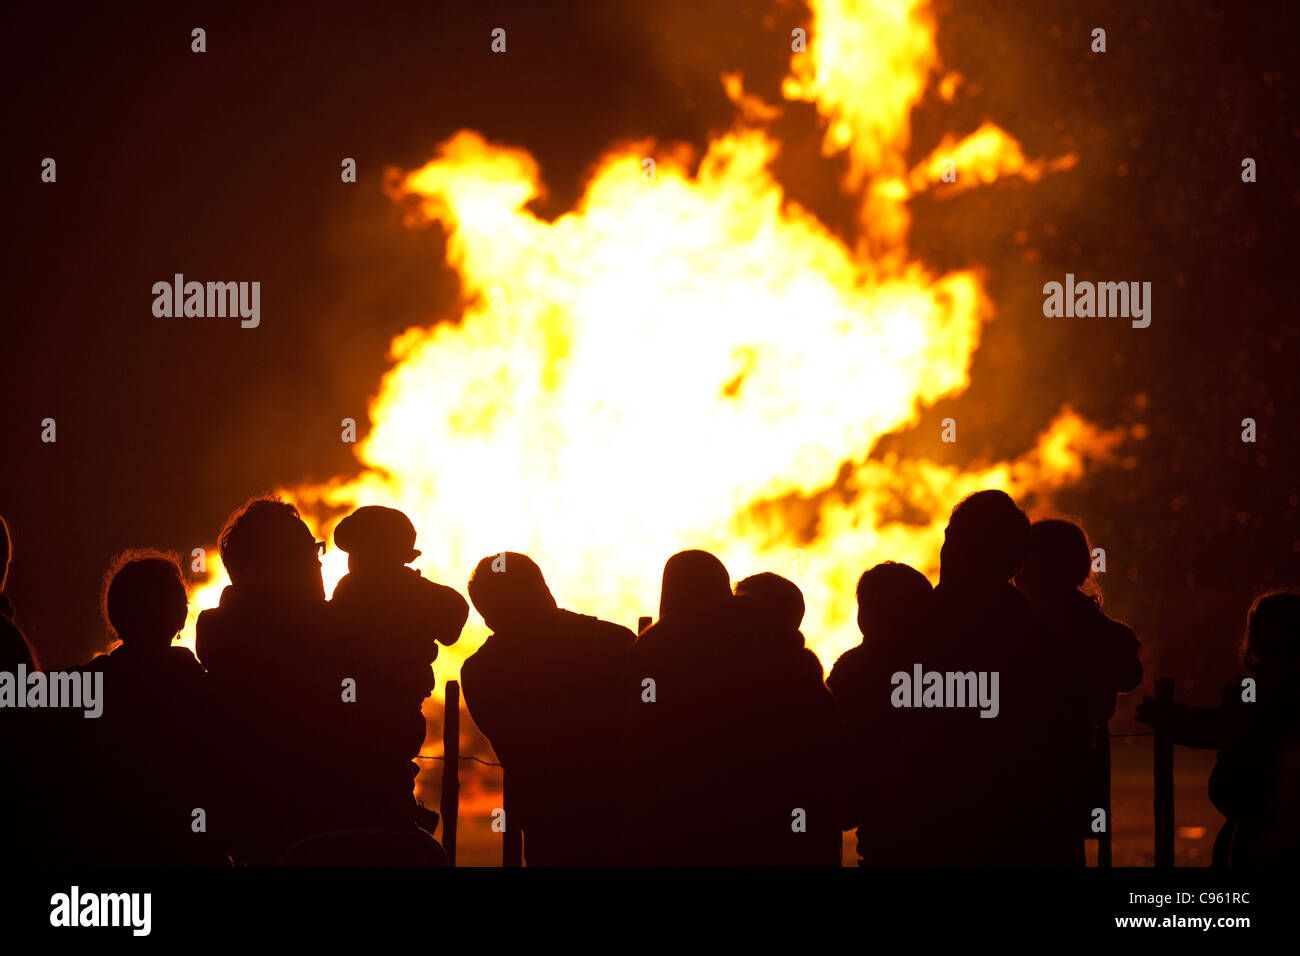 Families silhouetted by flames watching a bonfire on Guy Fawkes night, Wimbledon Park, London, UK. Photo:Jeff Gilbert Stock Photo